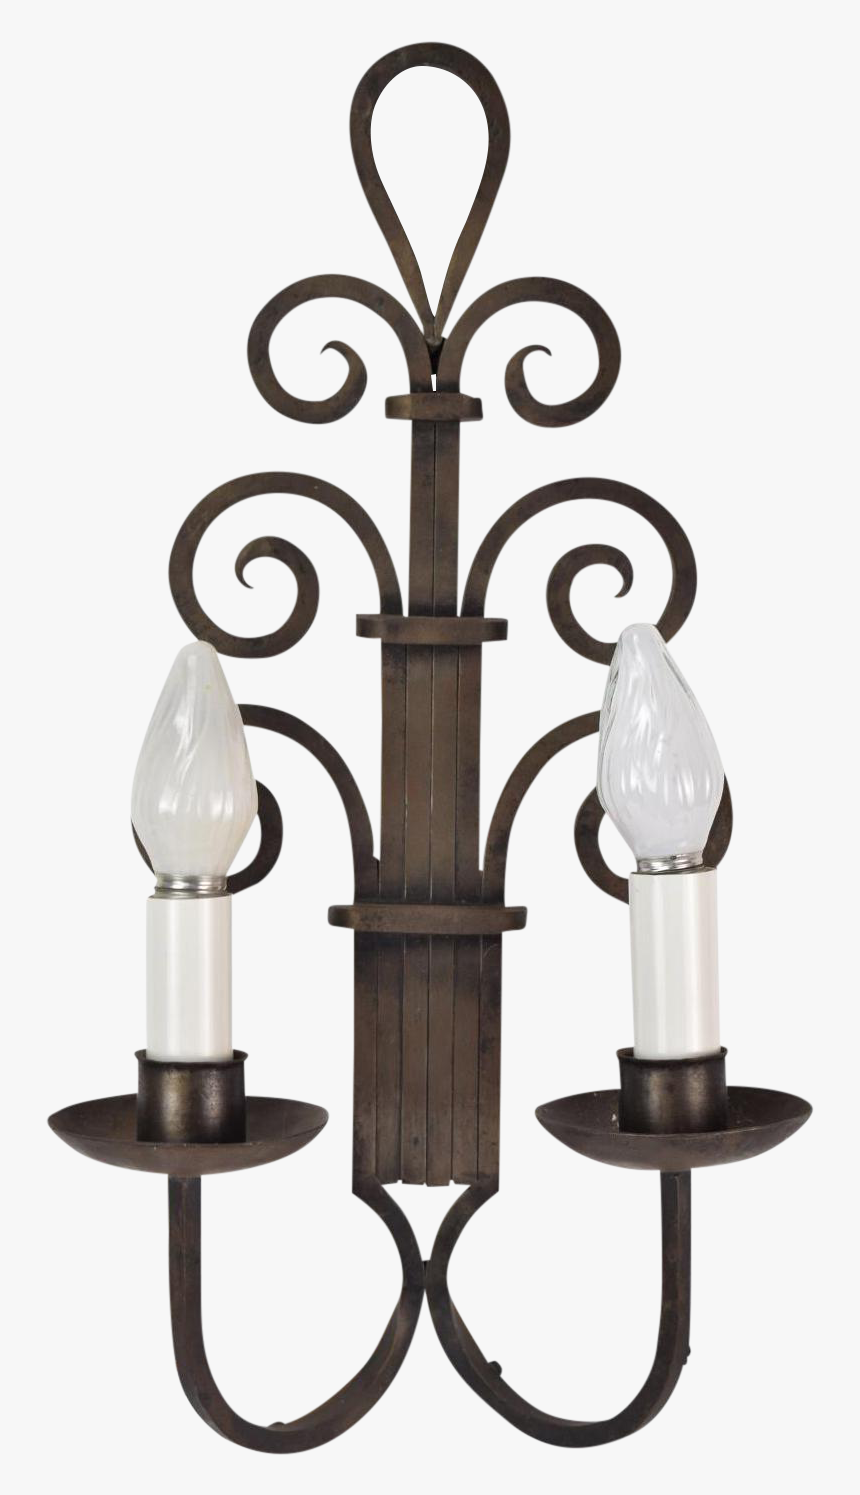 Gothic Candles Png Candelabra - Candle Wall Sconces Transparent Background, Png Download, Free Download